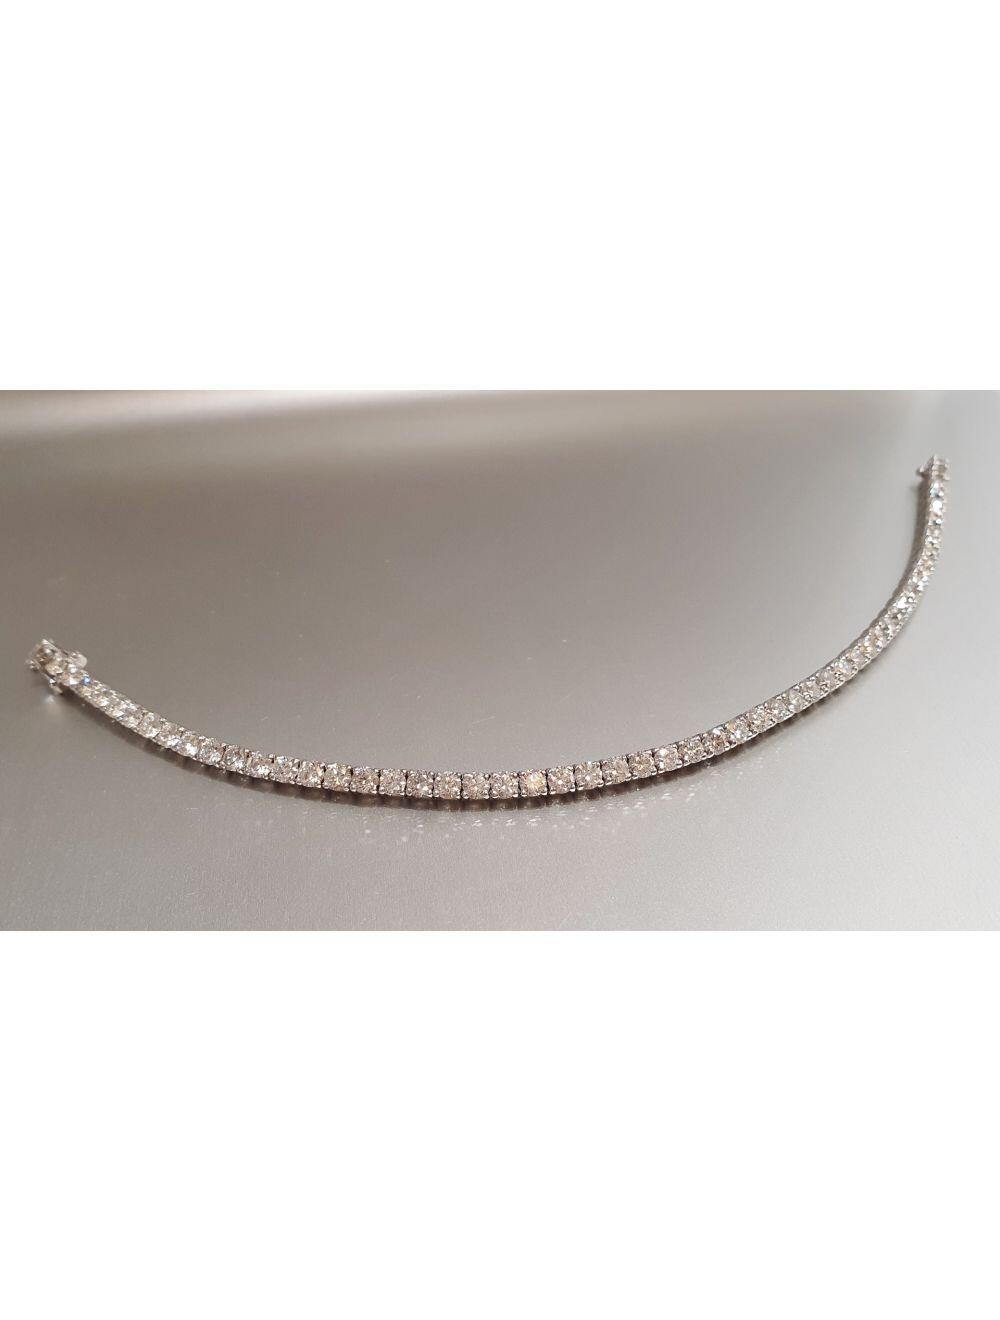 # River bracelet 7.00ct (56 diamonds of 0.125ct) white gold 18.0cm G VS1 , 13.4gr, high security clasp, double 8, made m